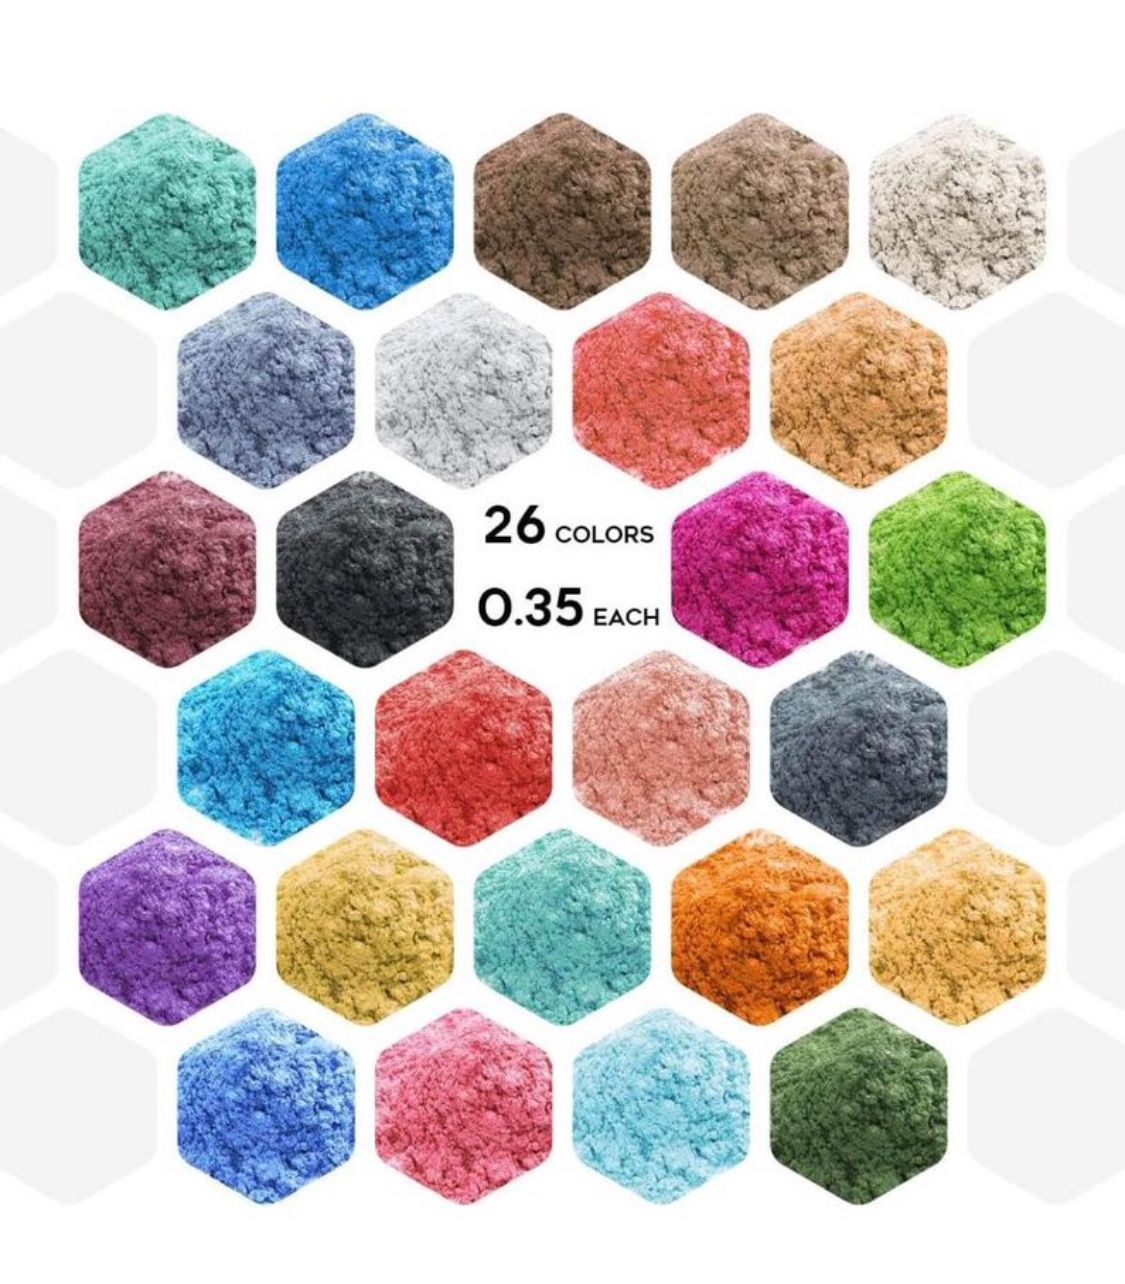 Large Capacity Mica Powder for Epoxy Resin, 9oz(0.35oz Each) 26 Color Resin Pigment,Shimmering Mica